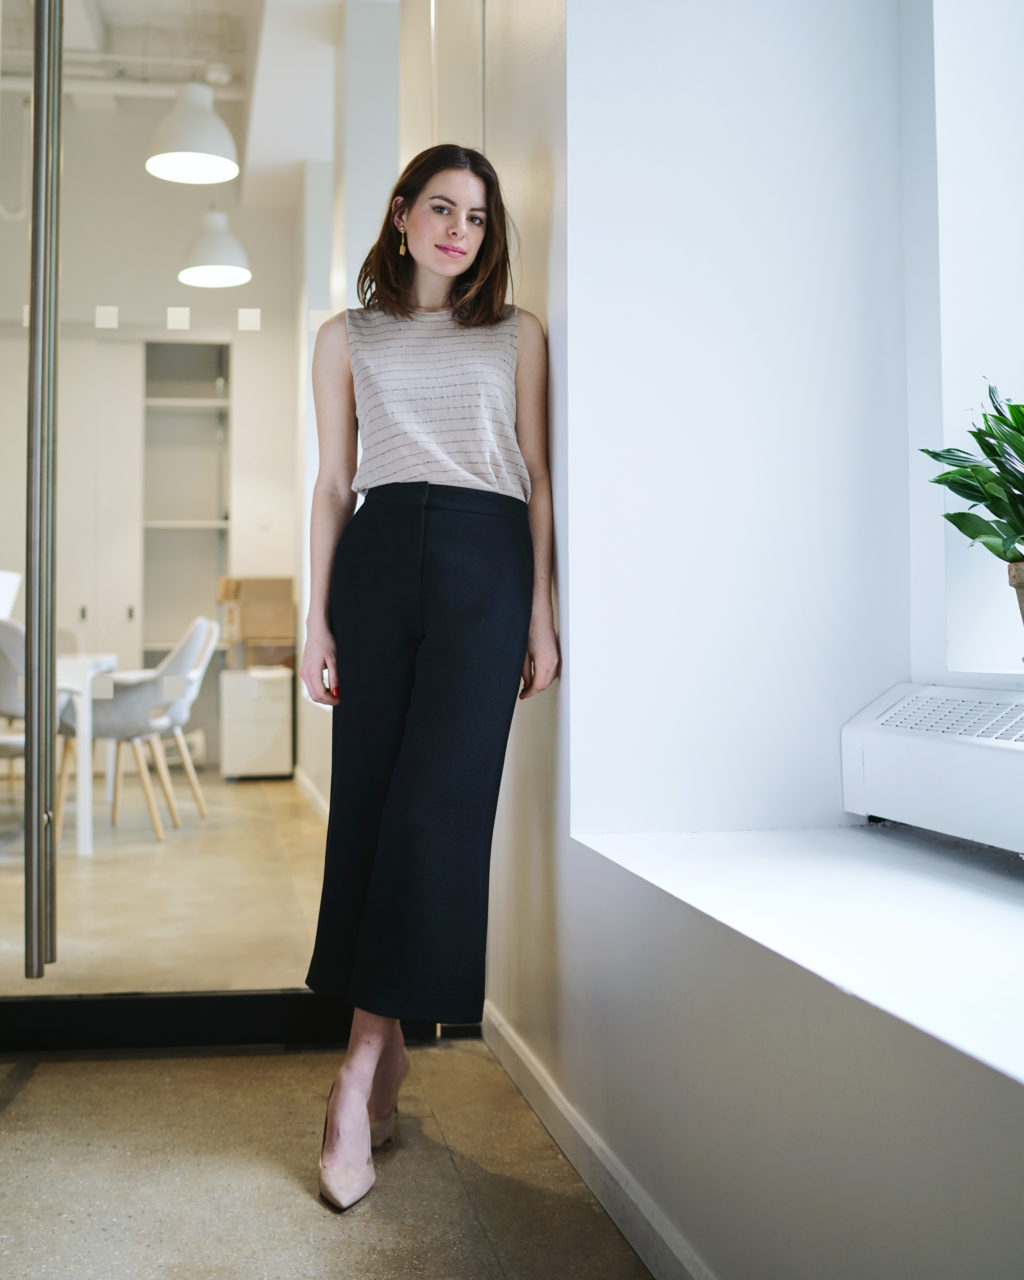 culotte outfit ideas